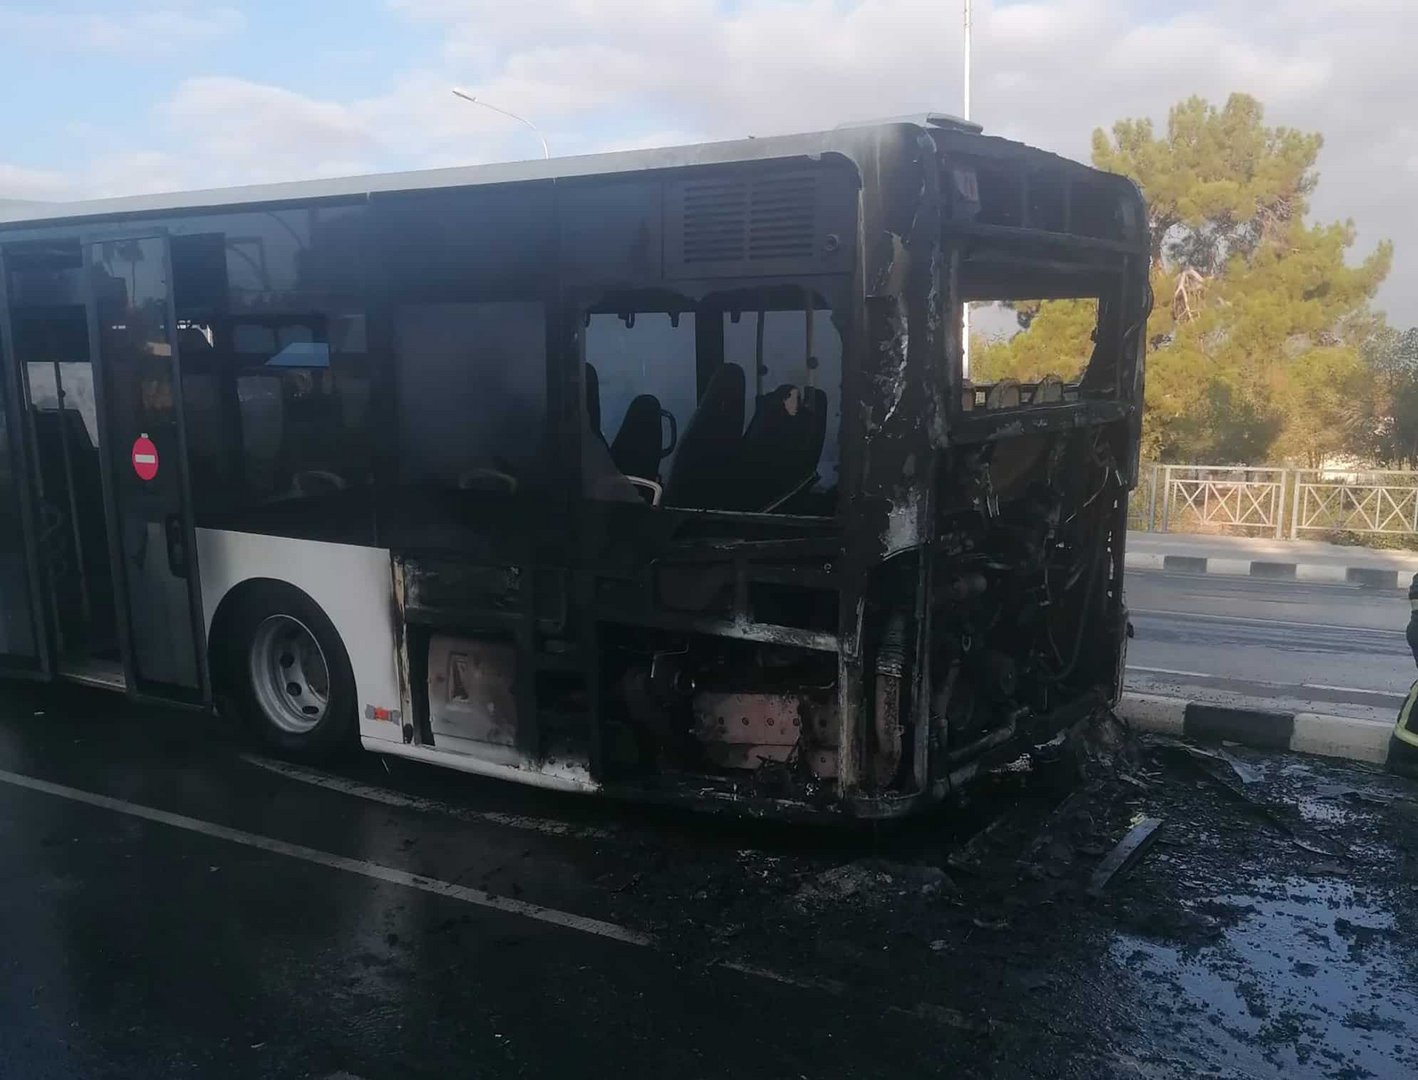 image &#8216;Bus companies will need maintenance certificates for vehicles, following fire&#8217;